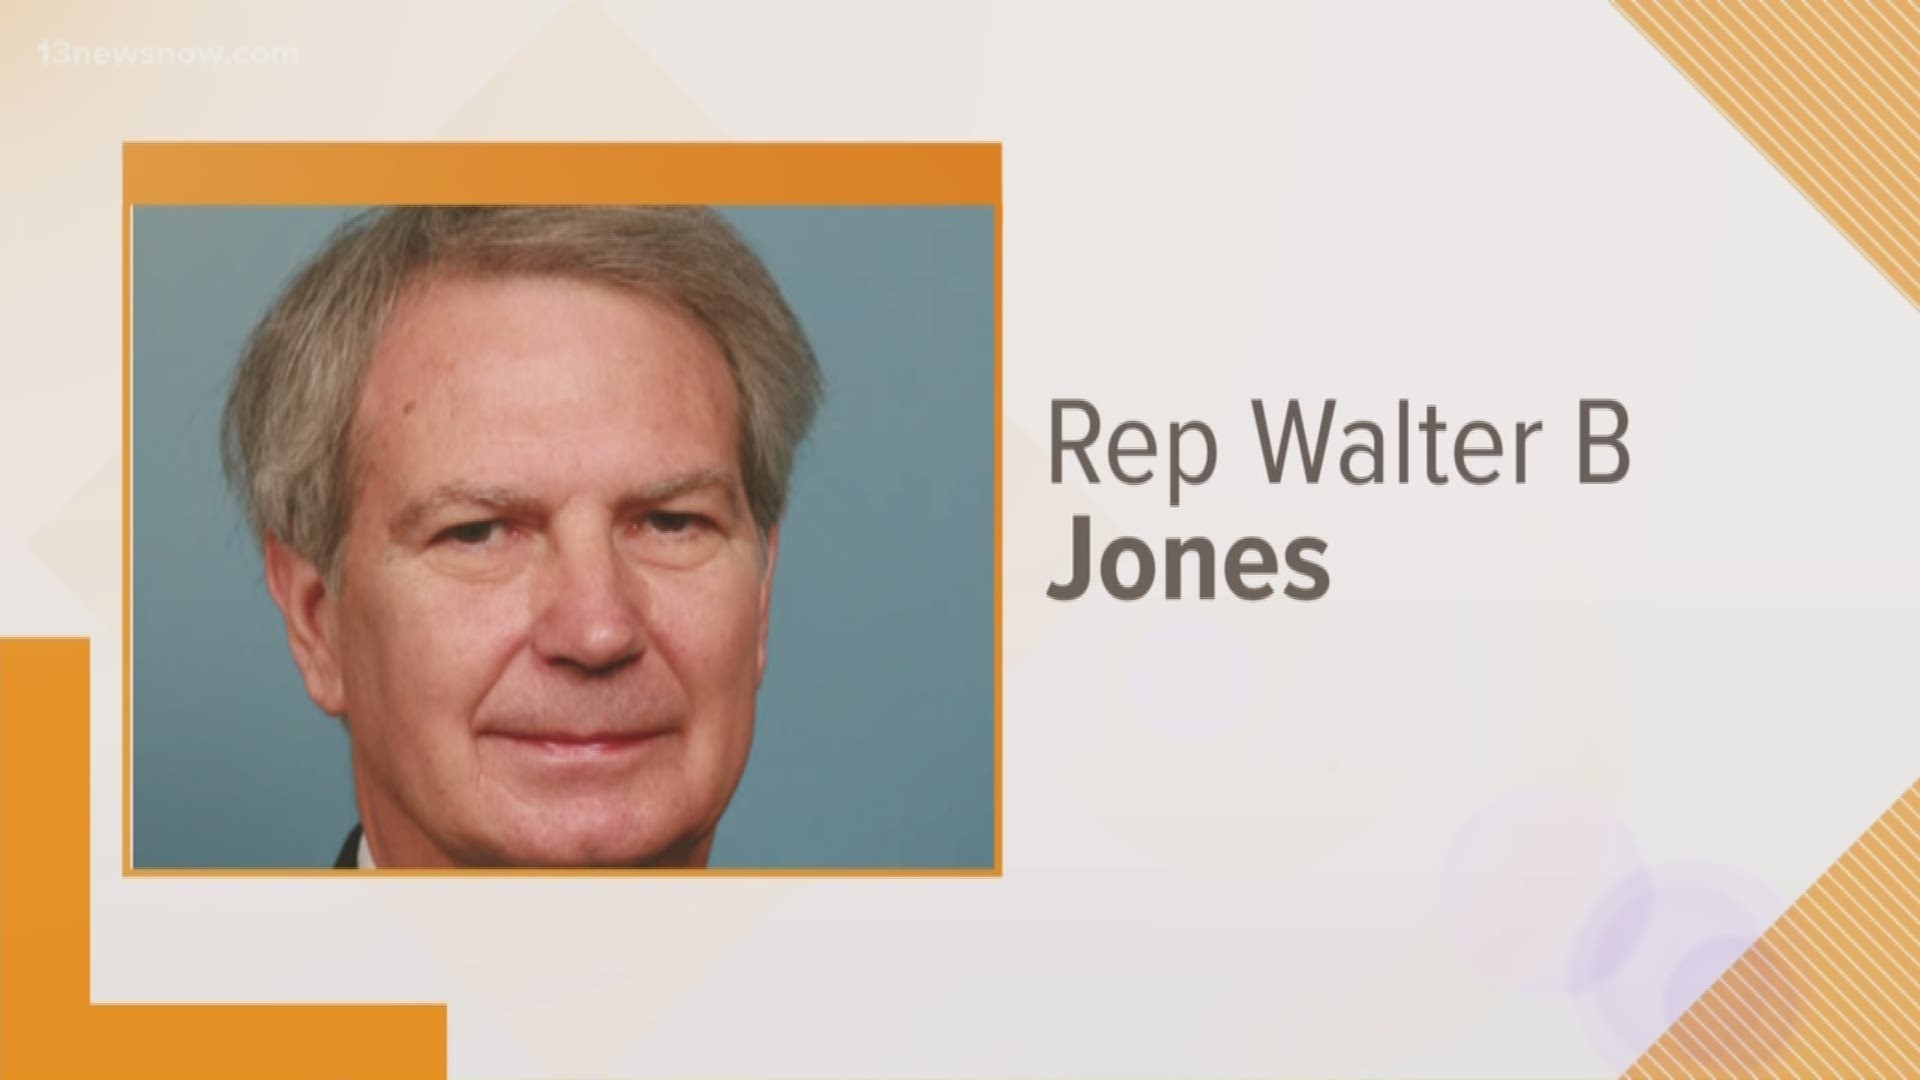 Walter Jones Jr. served North Carolina's 3rd Congressional District, which includes the Outer Banks.